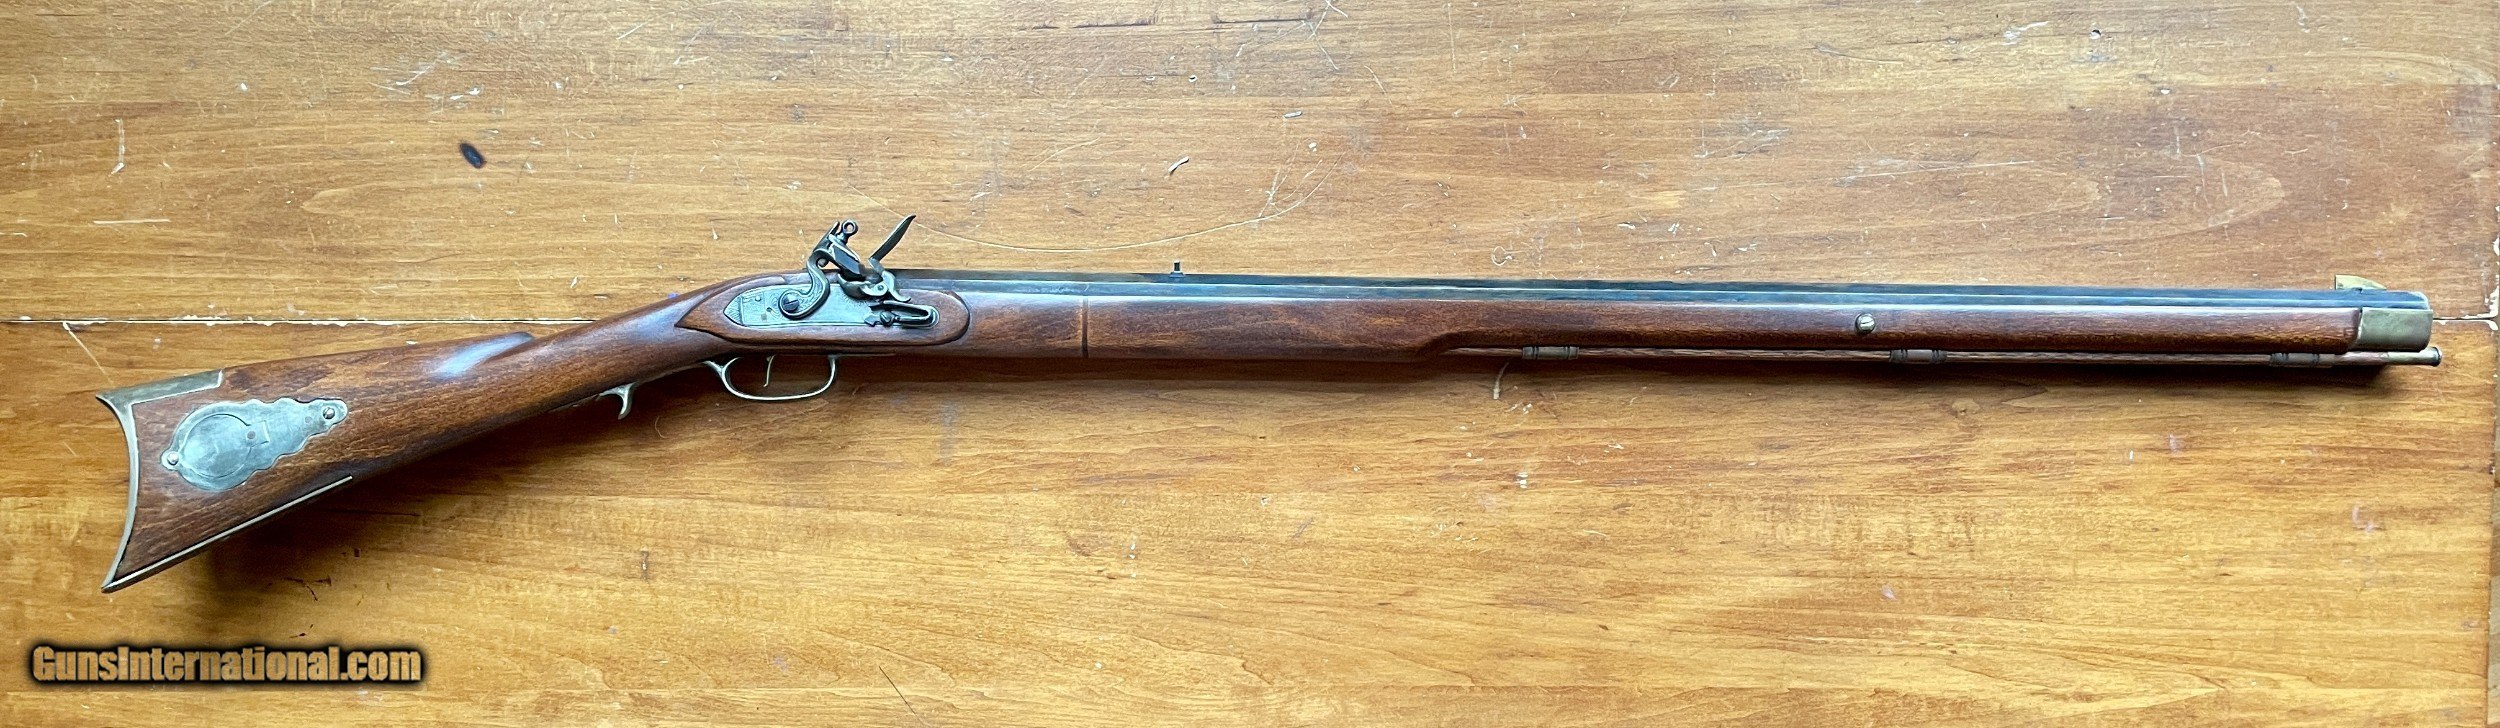 Made-from-kit Kentucky rifle in 45 caliber, from an obscure